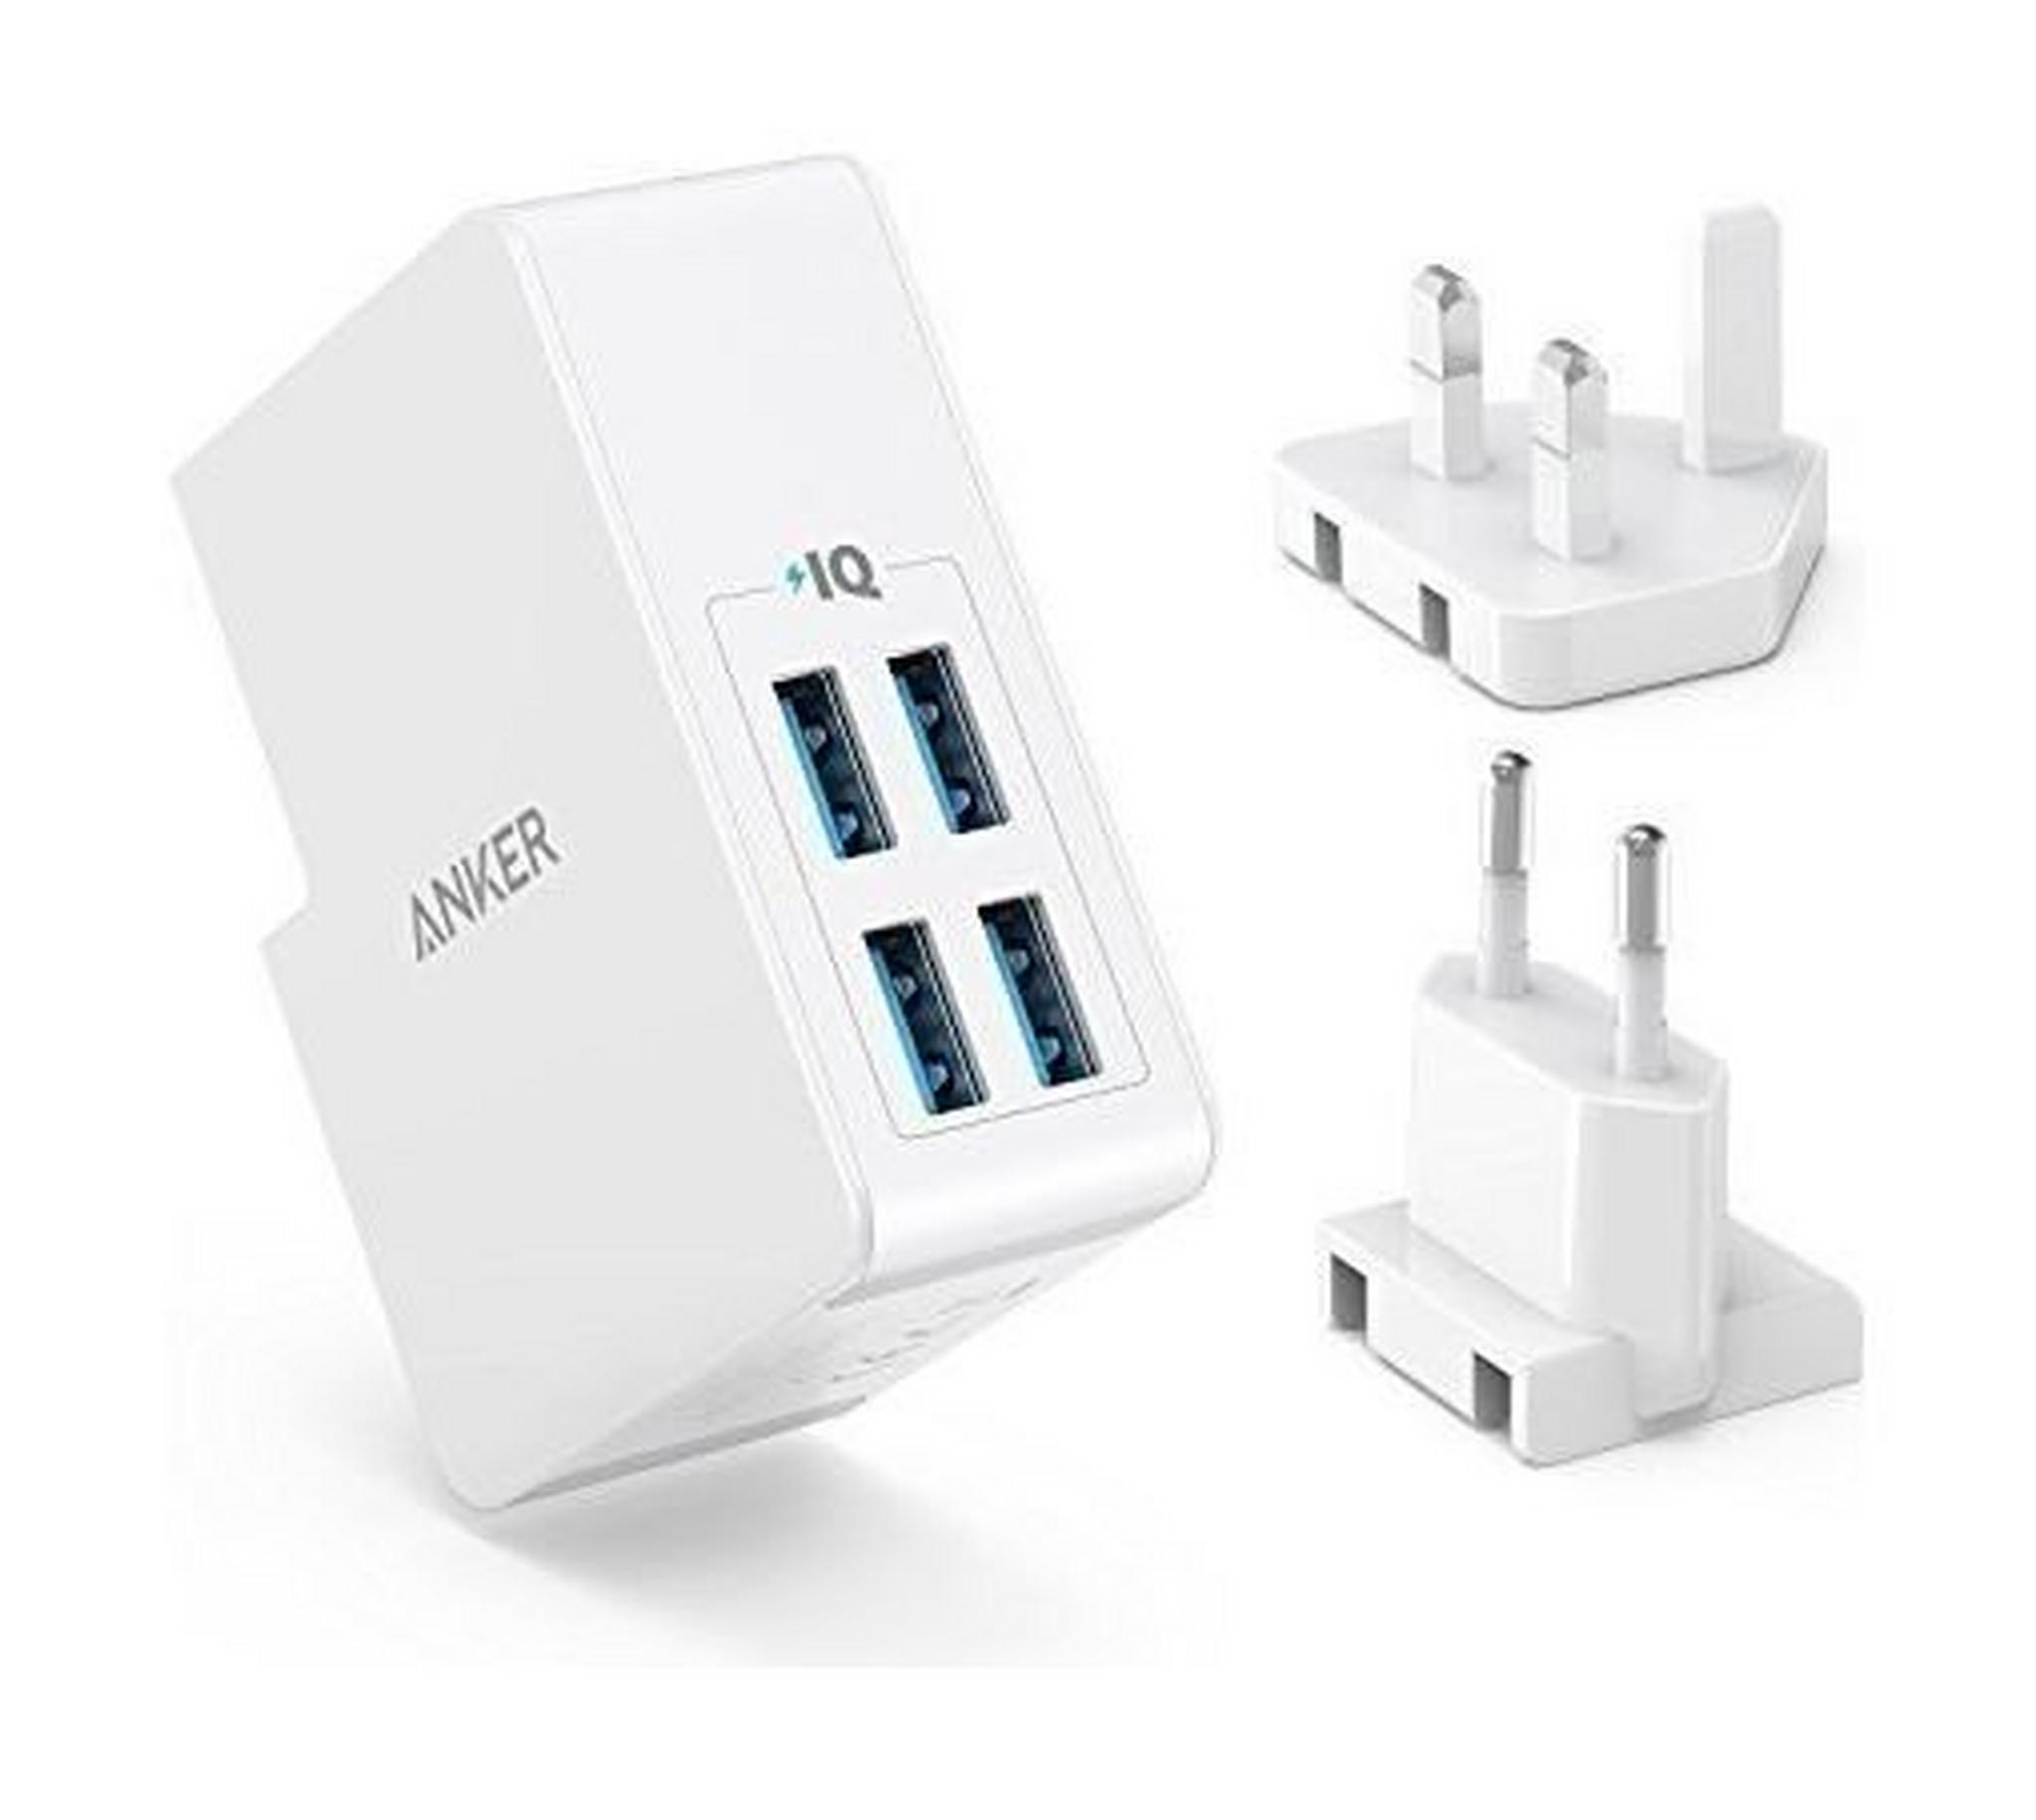 Anker PowerPort 4 Ports Wall Charger - White